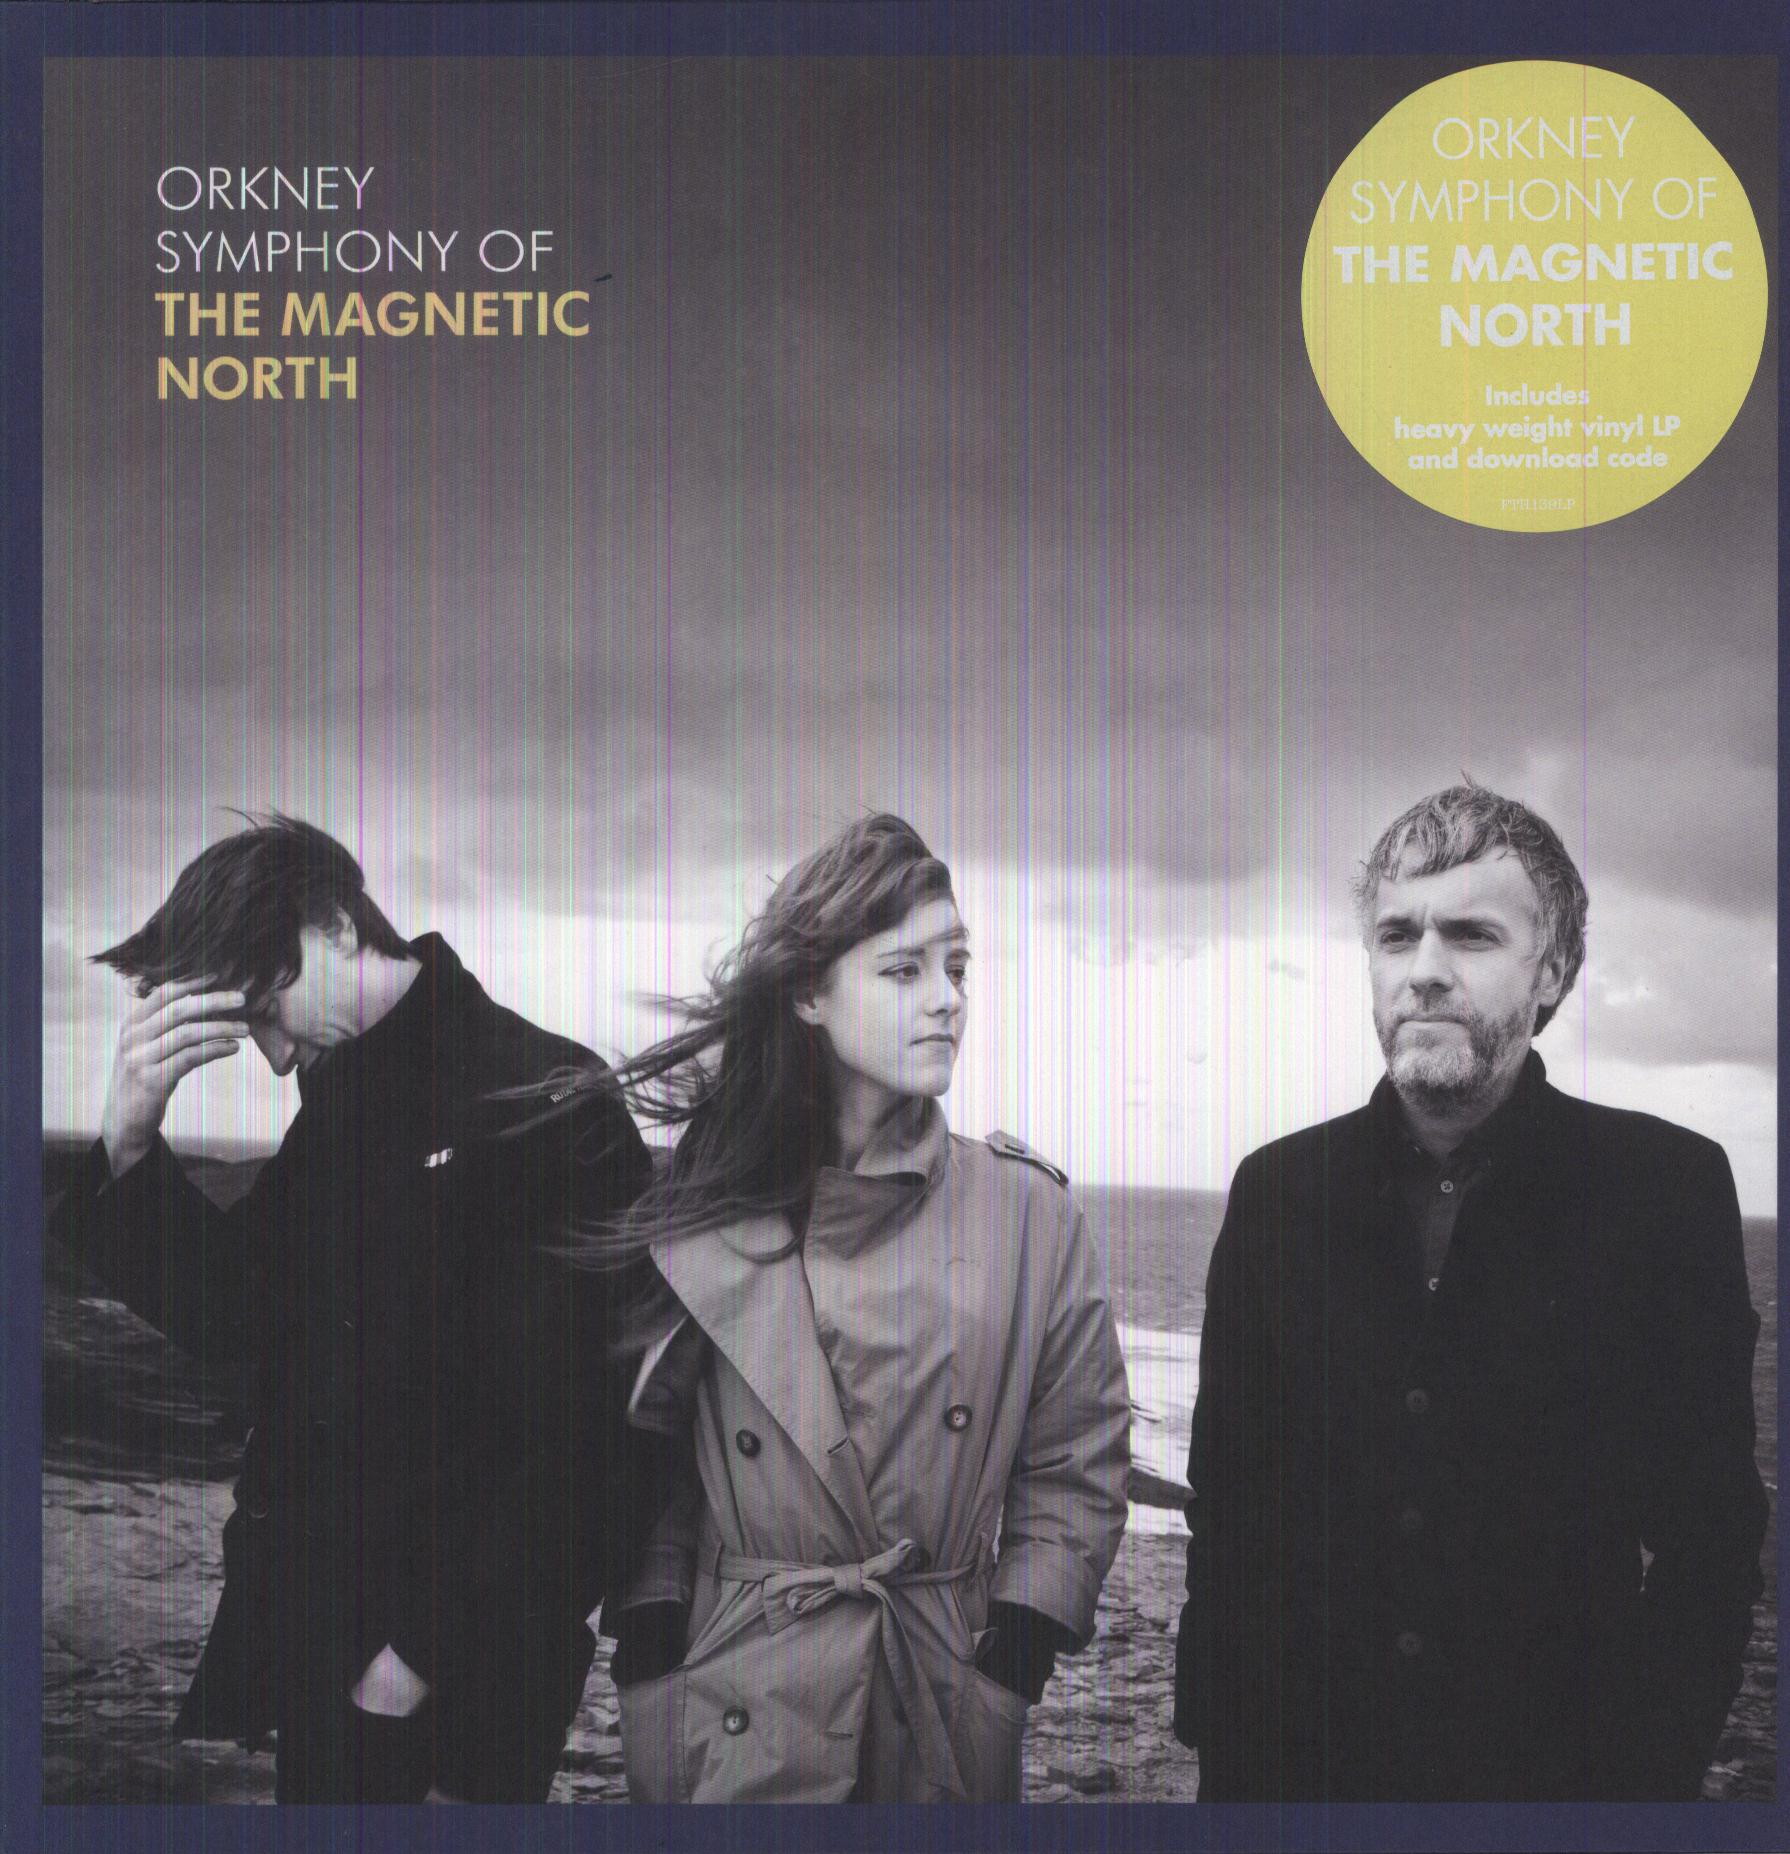 ORKNEY: SYMPHONY OF THE MAGNETIC NORTH